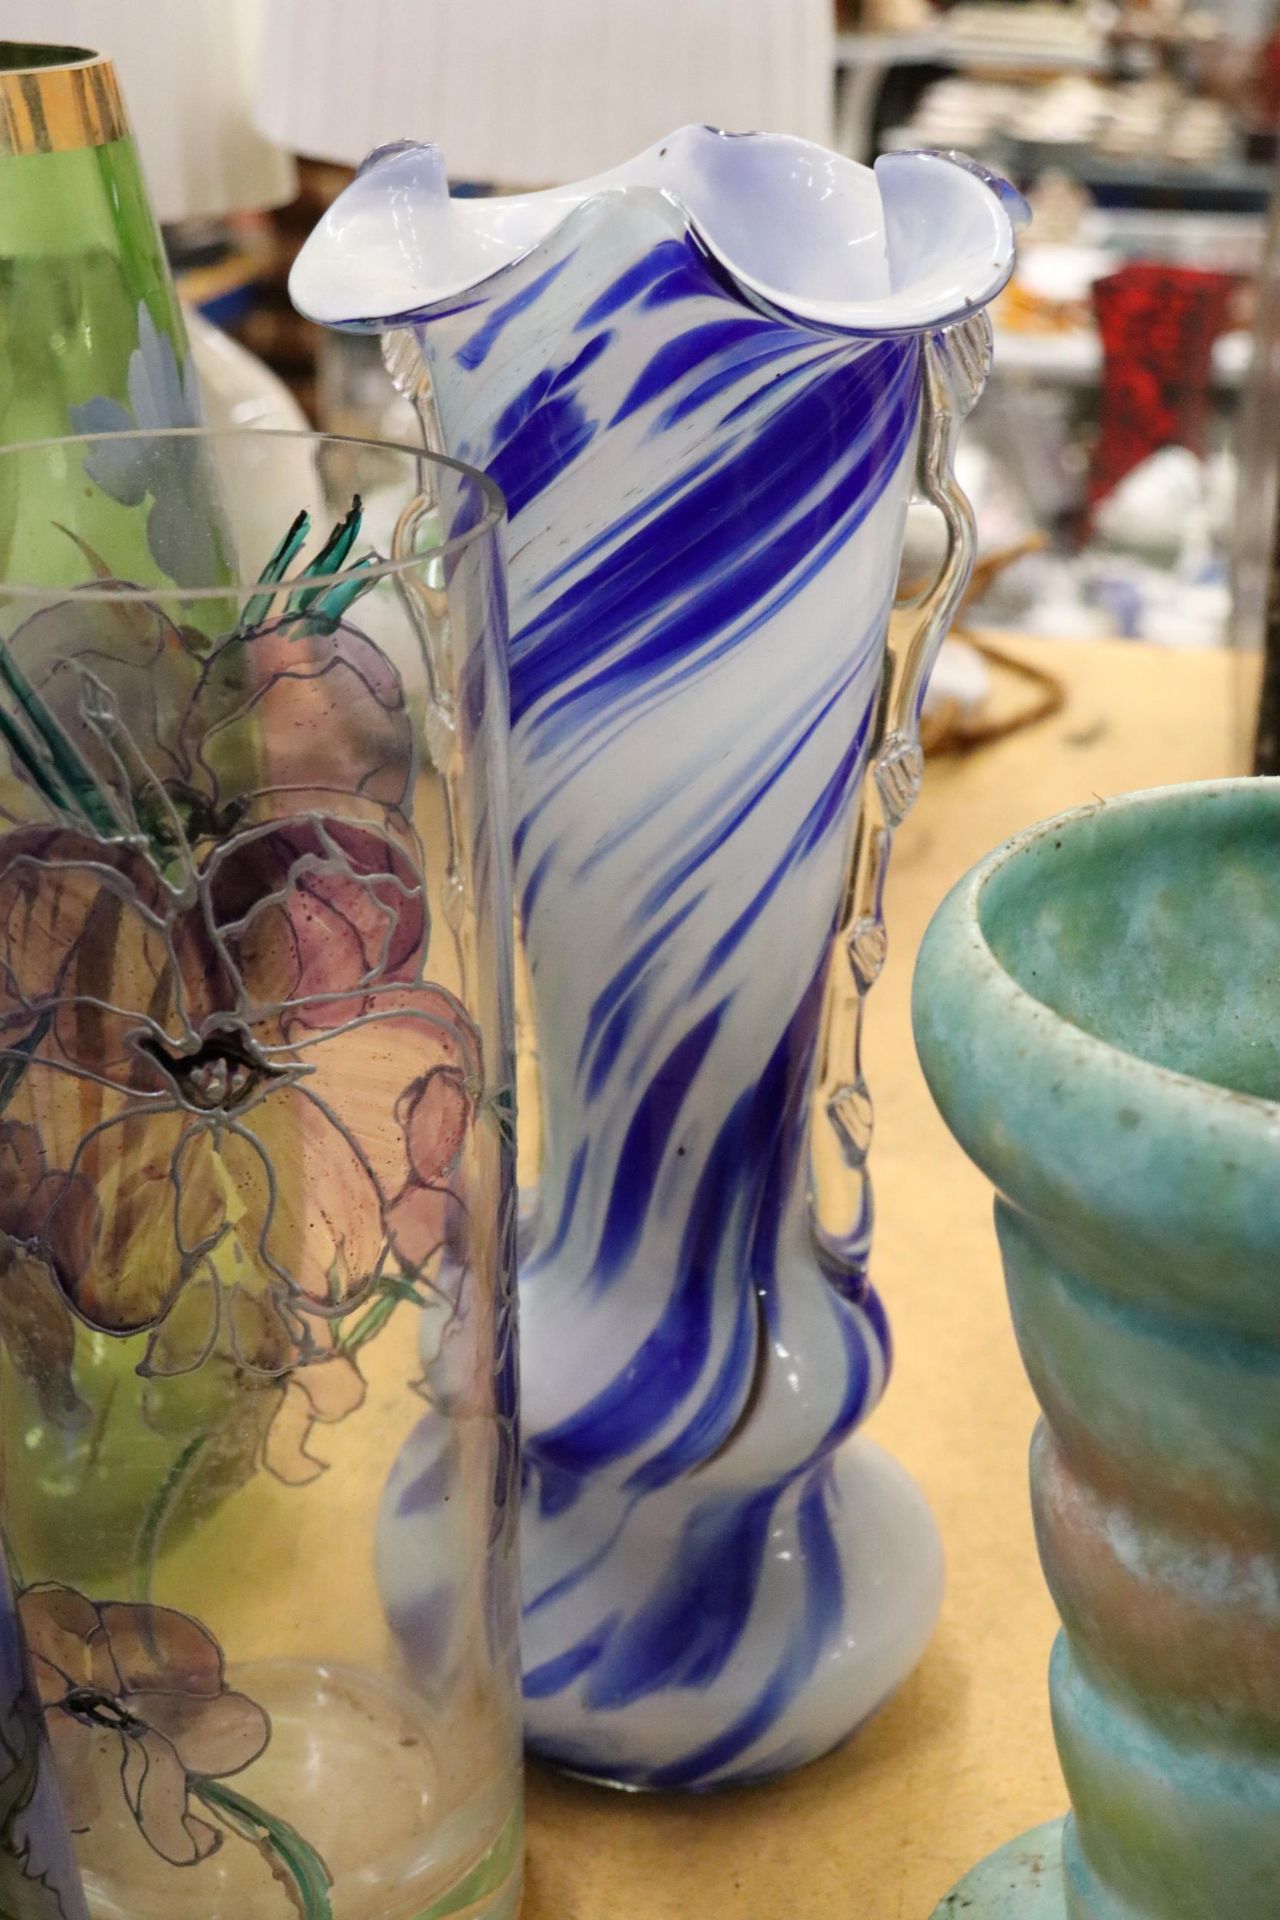 A LARGE MIXED LOT OF PAINTED ON GLASS VASES PLUS ONE DELCROFT WARE CERAMIC VASE - Image 6 of 11